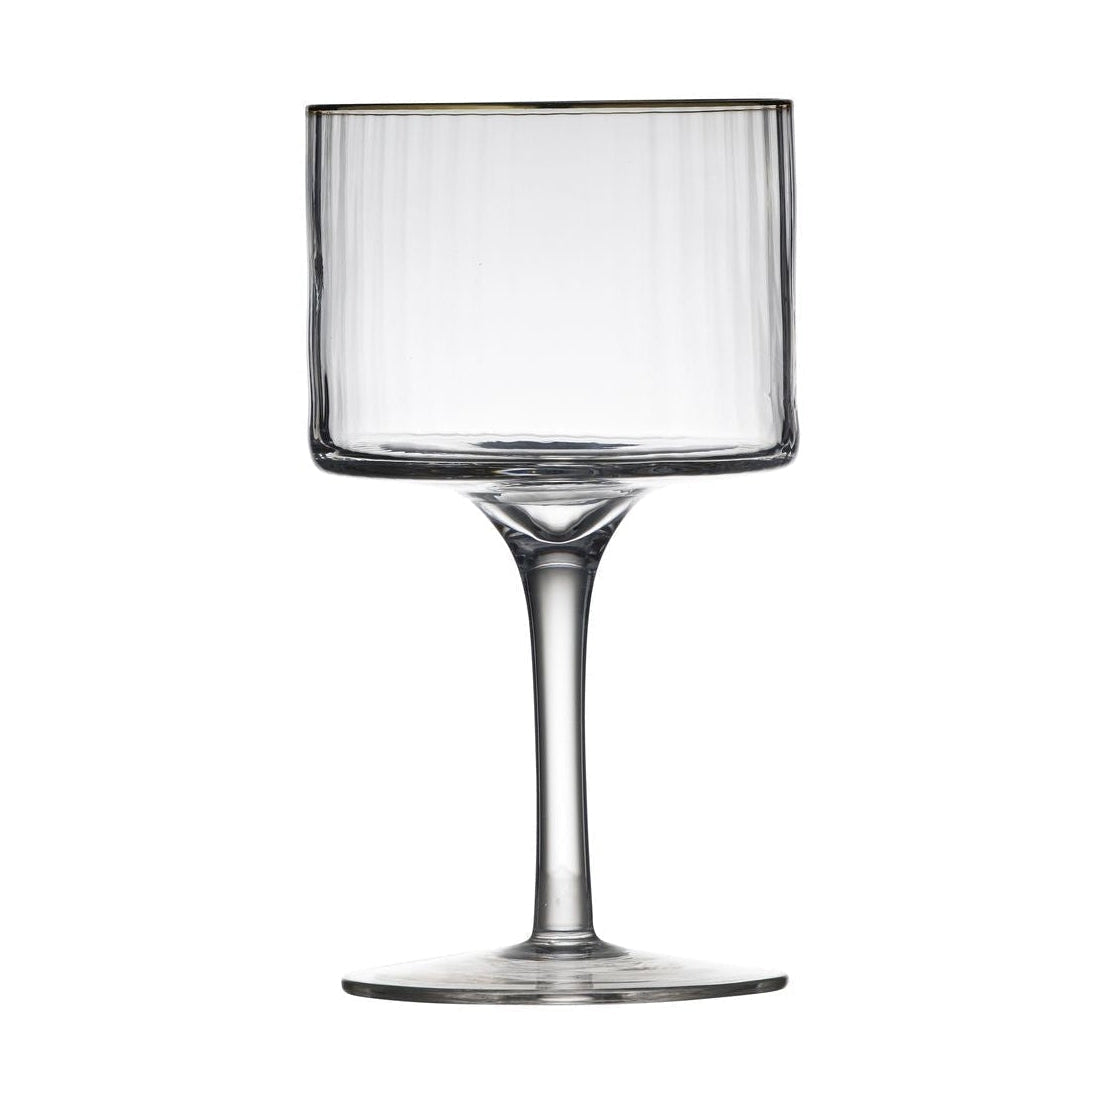 Lyngby Glas Palermo Gold Gin & Tonic Glass 32 Cl, 4 st.